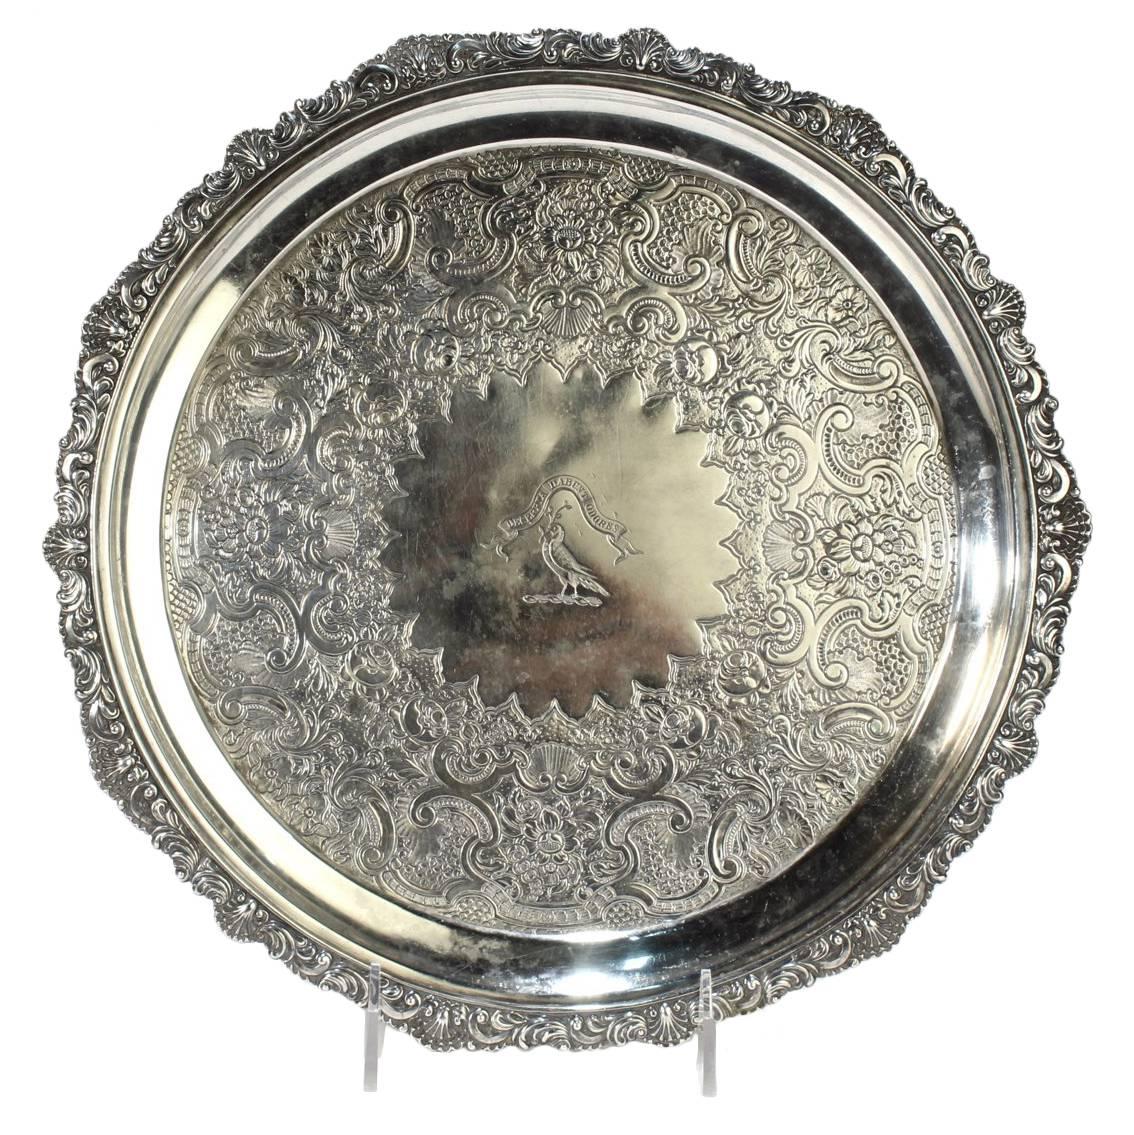 Antique Crested Scottish Sterling Silver Salver or Tray by George McHattie